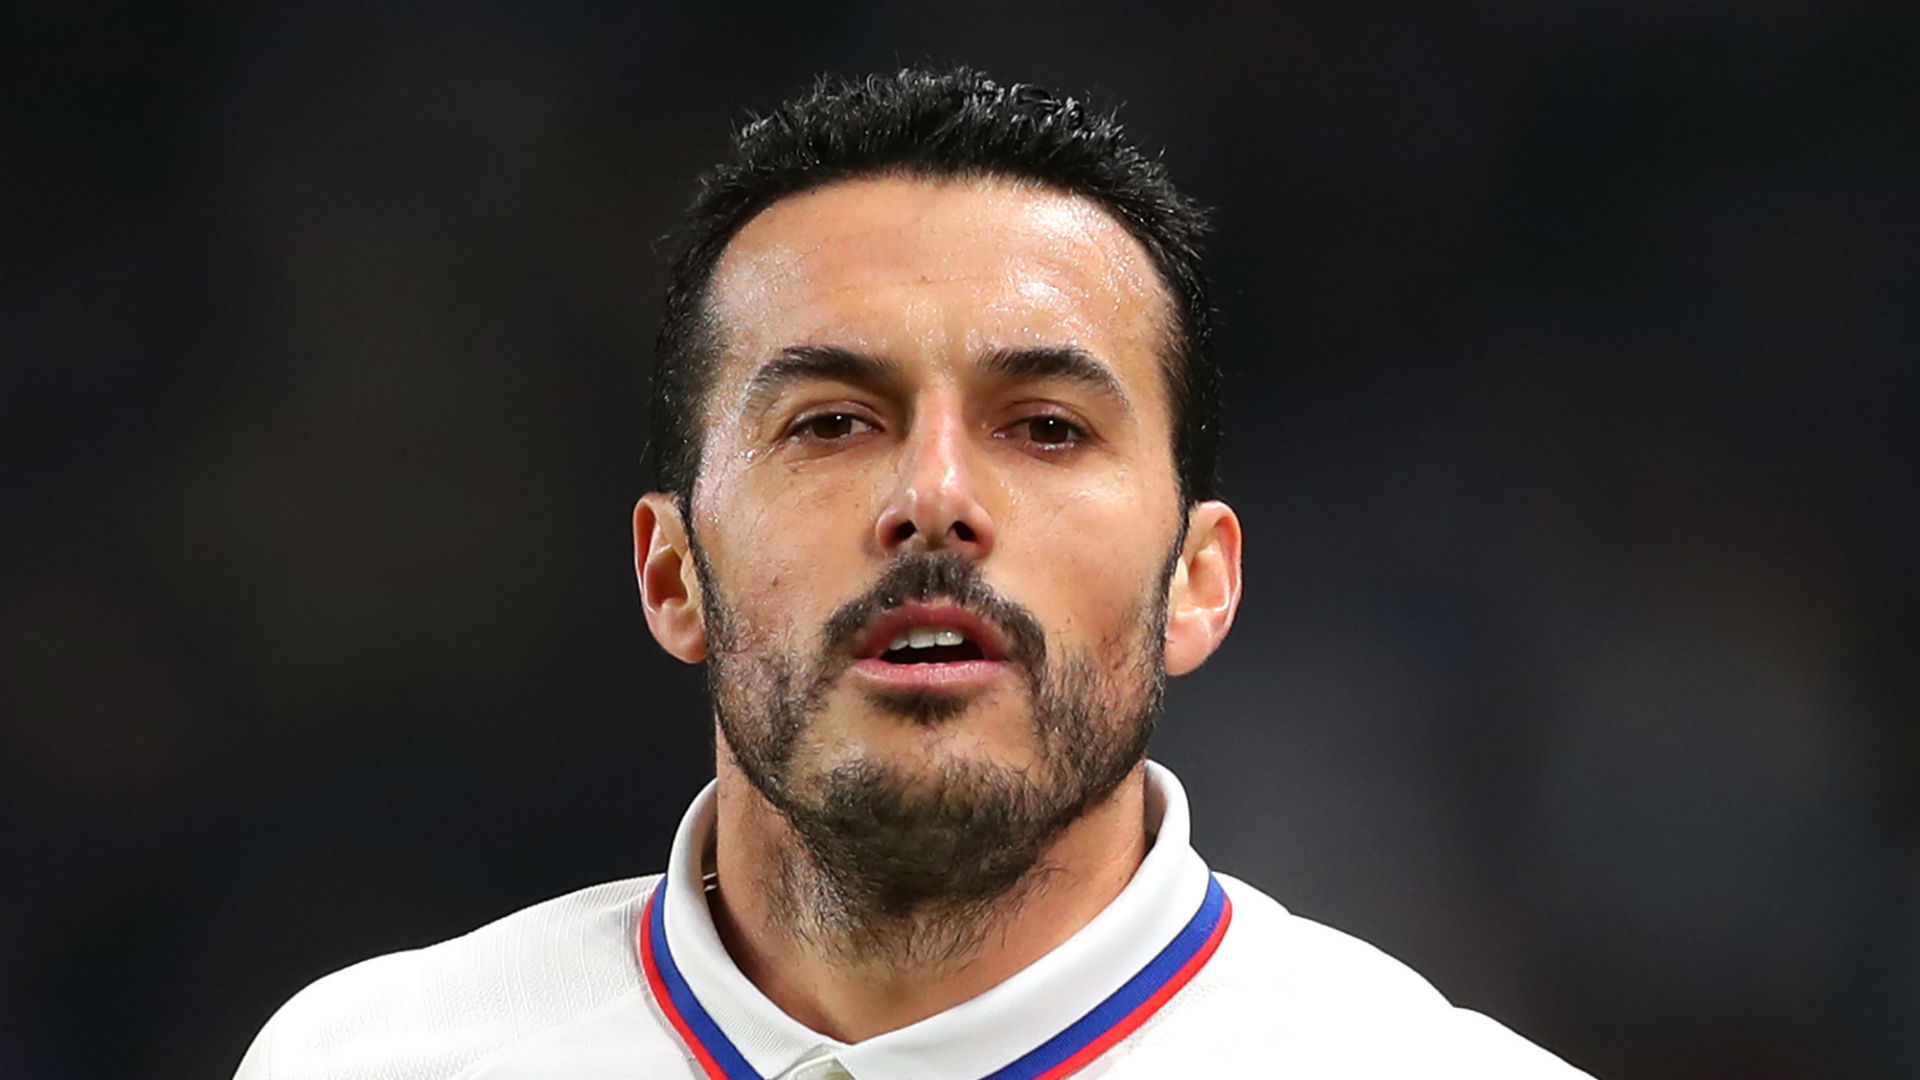 The FA Cup final appears to have been Pedro's last game for Chelsea after the former Spain winger underwent shoulder surgery.